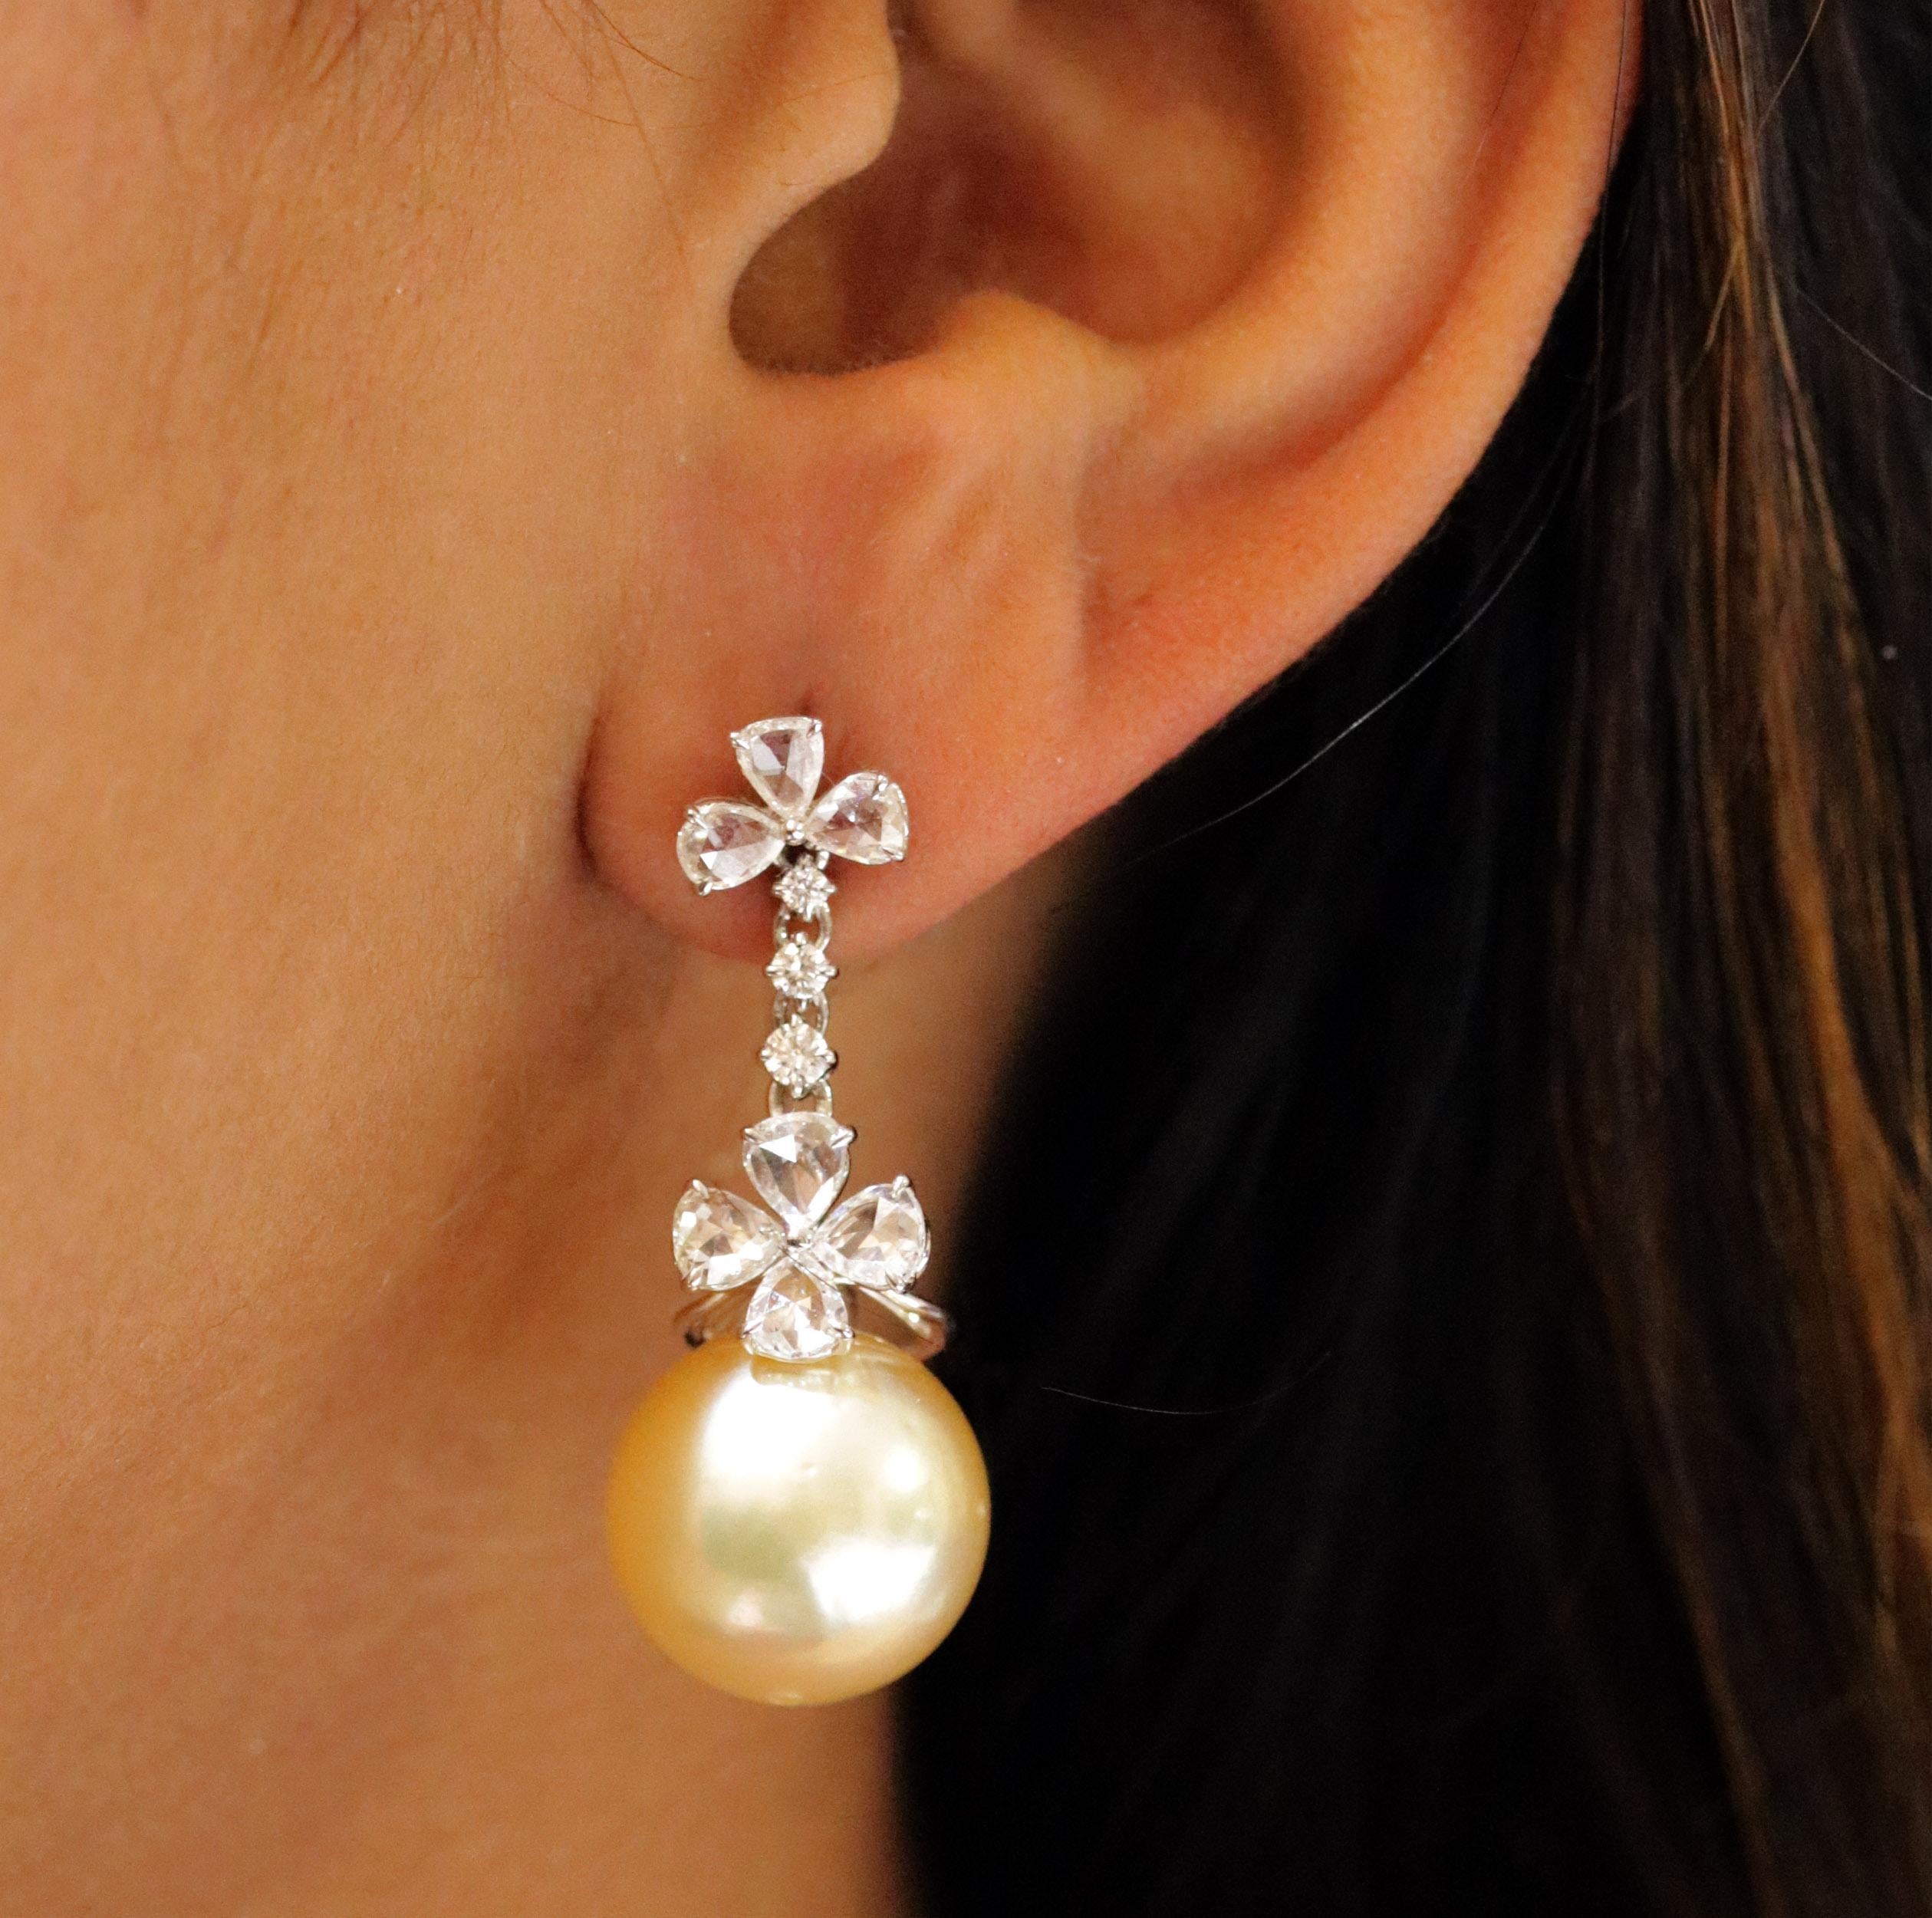 Gross Weight: 13.83 Grams
Diamond Weight: 2.30 cts
Pearl Weight: 37.60 cts
IGI Certified: Summary No: 31J857111811

Video of the product can be shared on request.

Feminine and classy, this pair of 18K white gold earrings featuring pear rose cut and